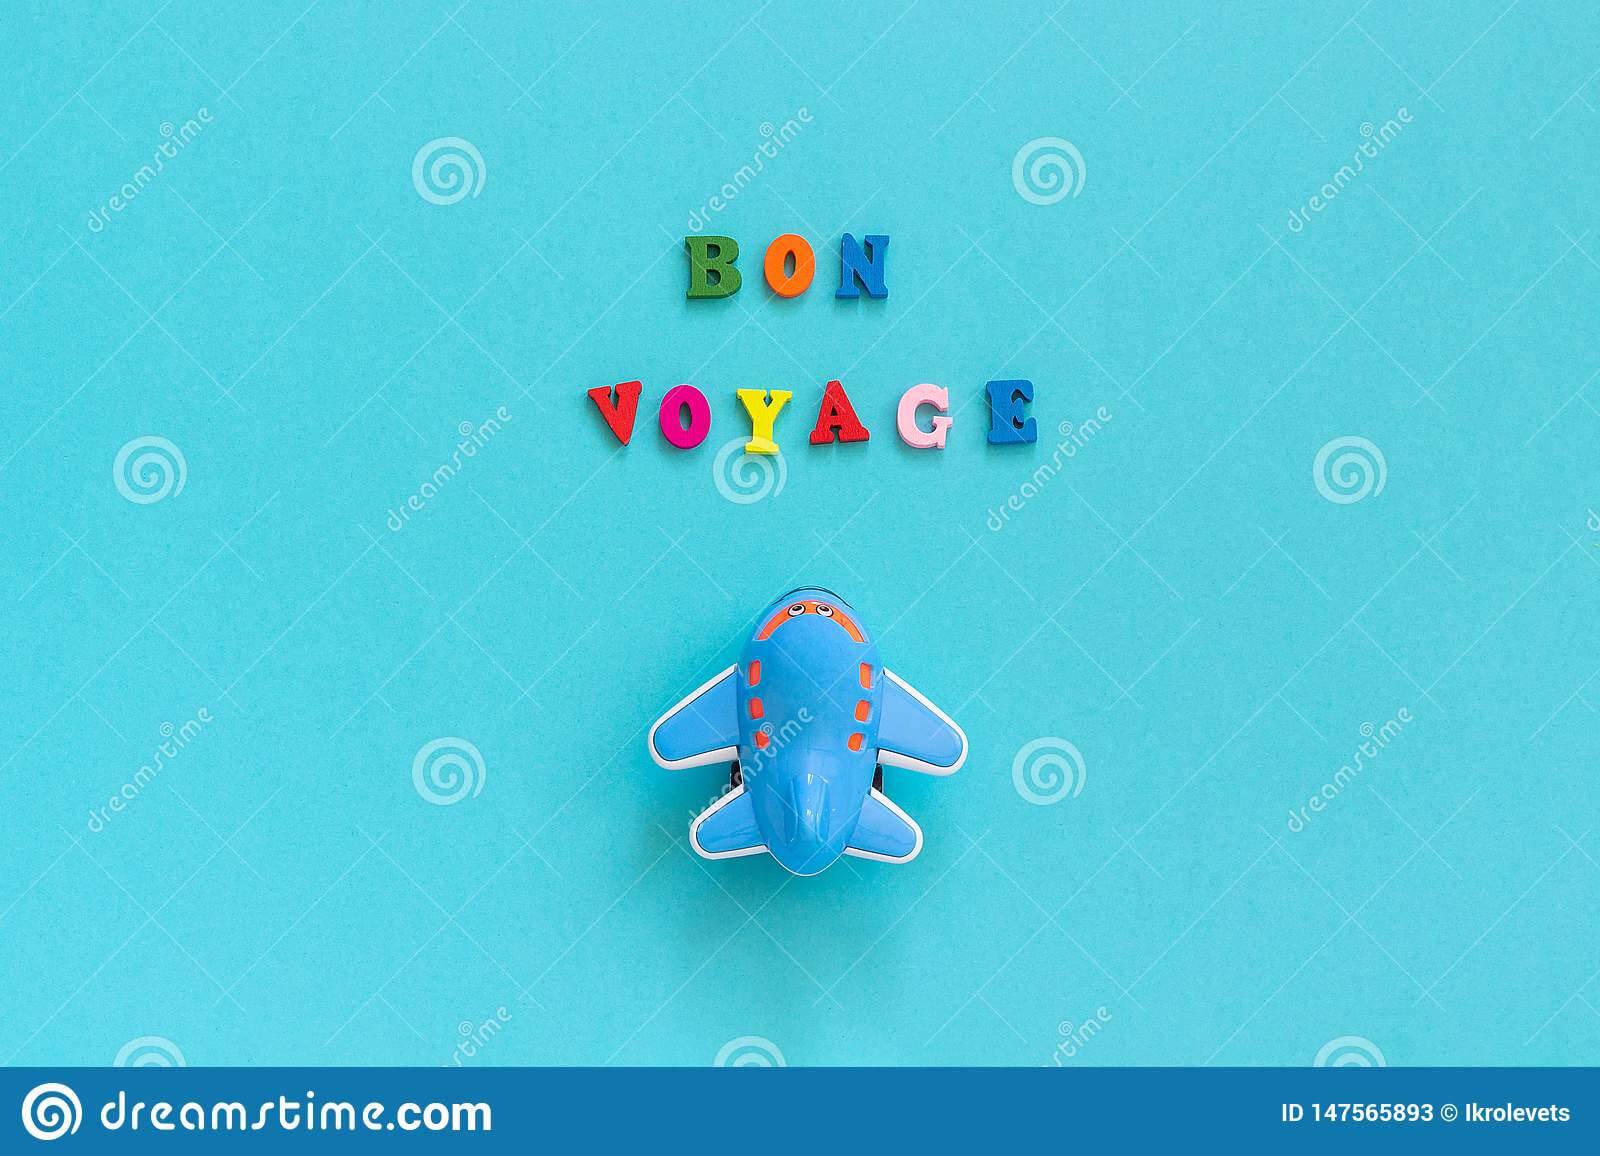 Bon Voyage Colorful Text And Children`s Funny Toy Plane On With Regard To Bon Voyage Card Template